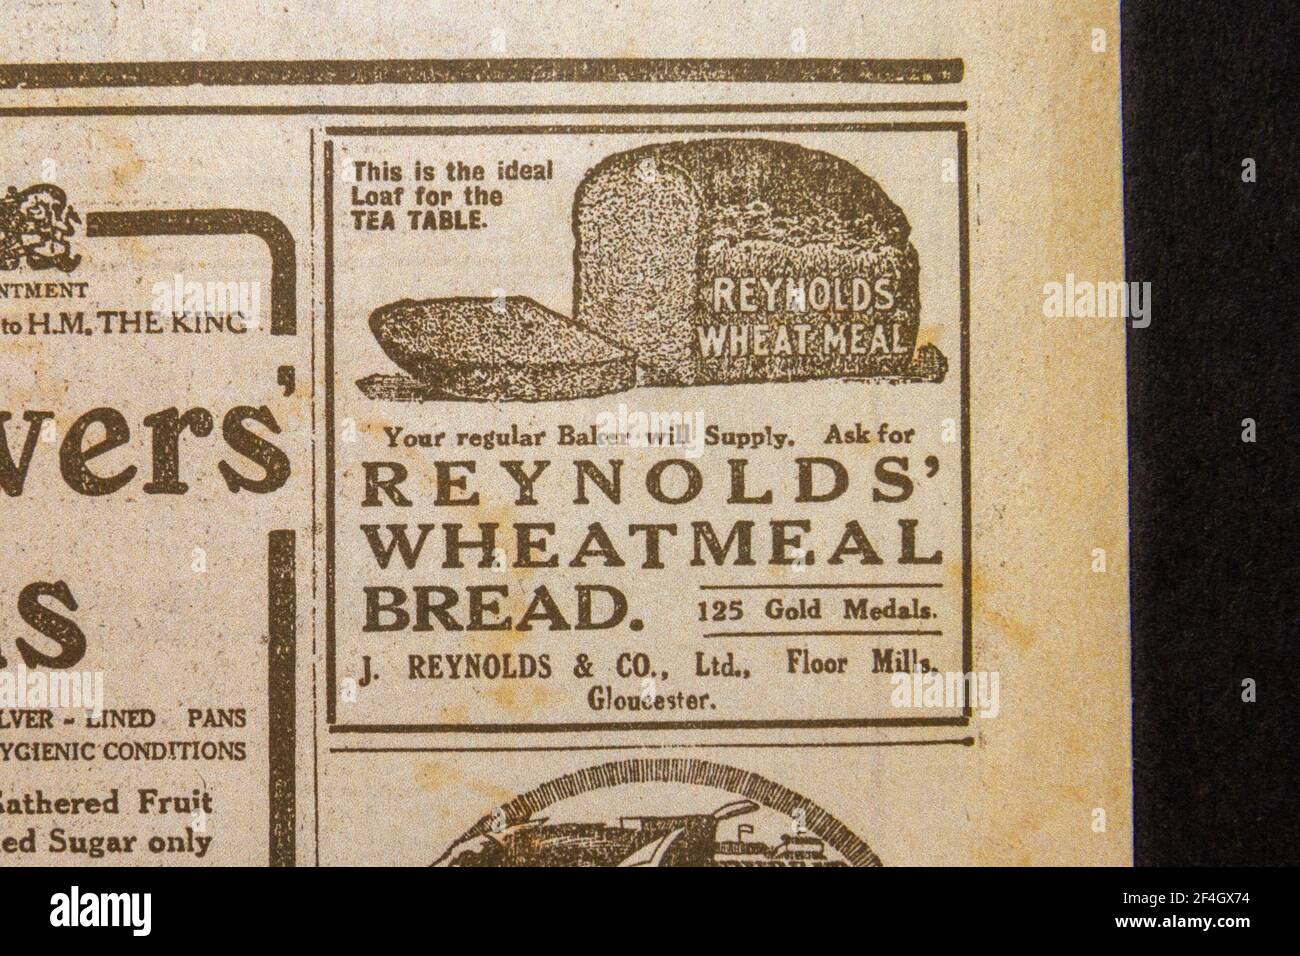 Advert for Reynolds' Wheatmeal Bread in the Daily News & Reader newspaper on 5th Aug 1914. Stock Photo